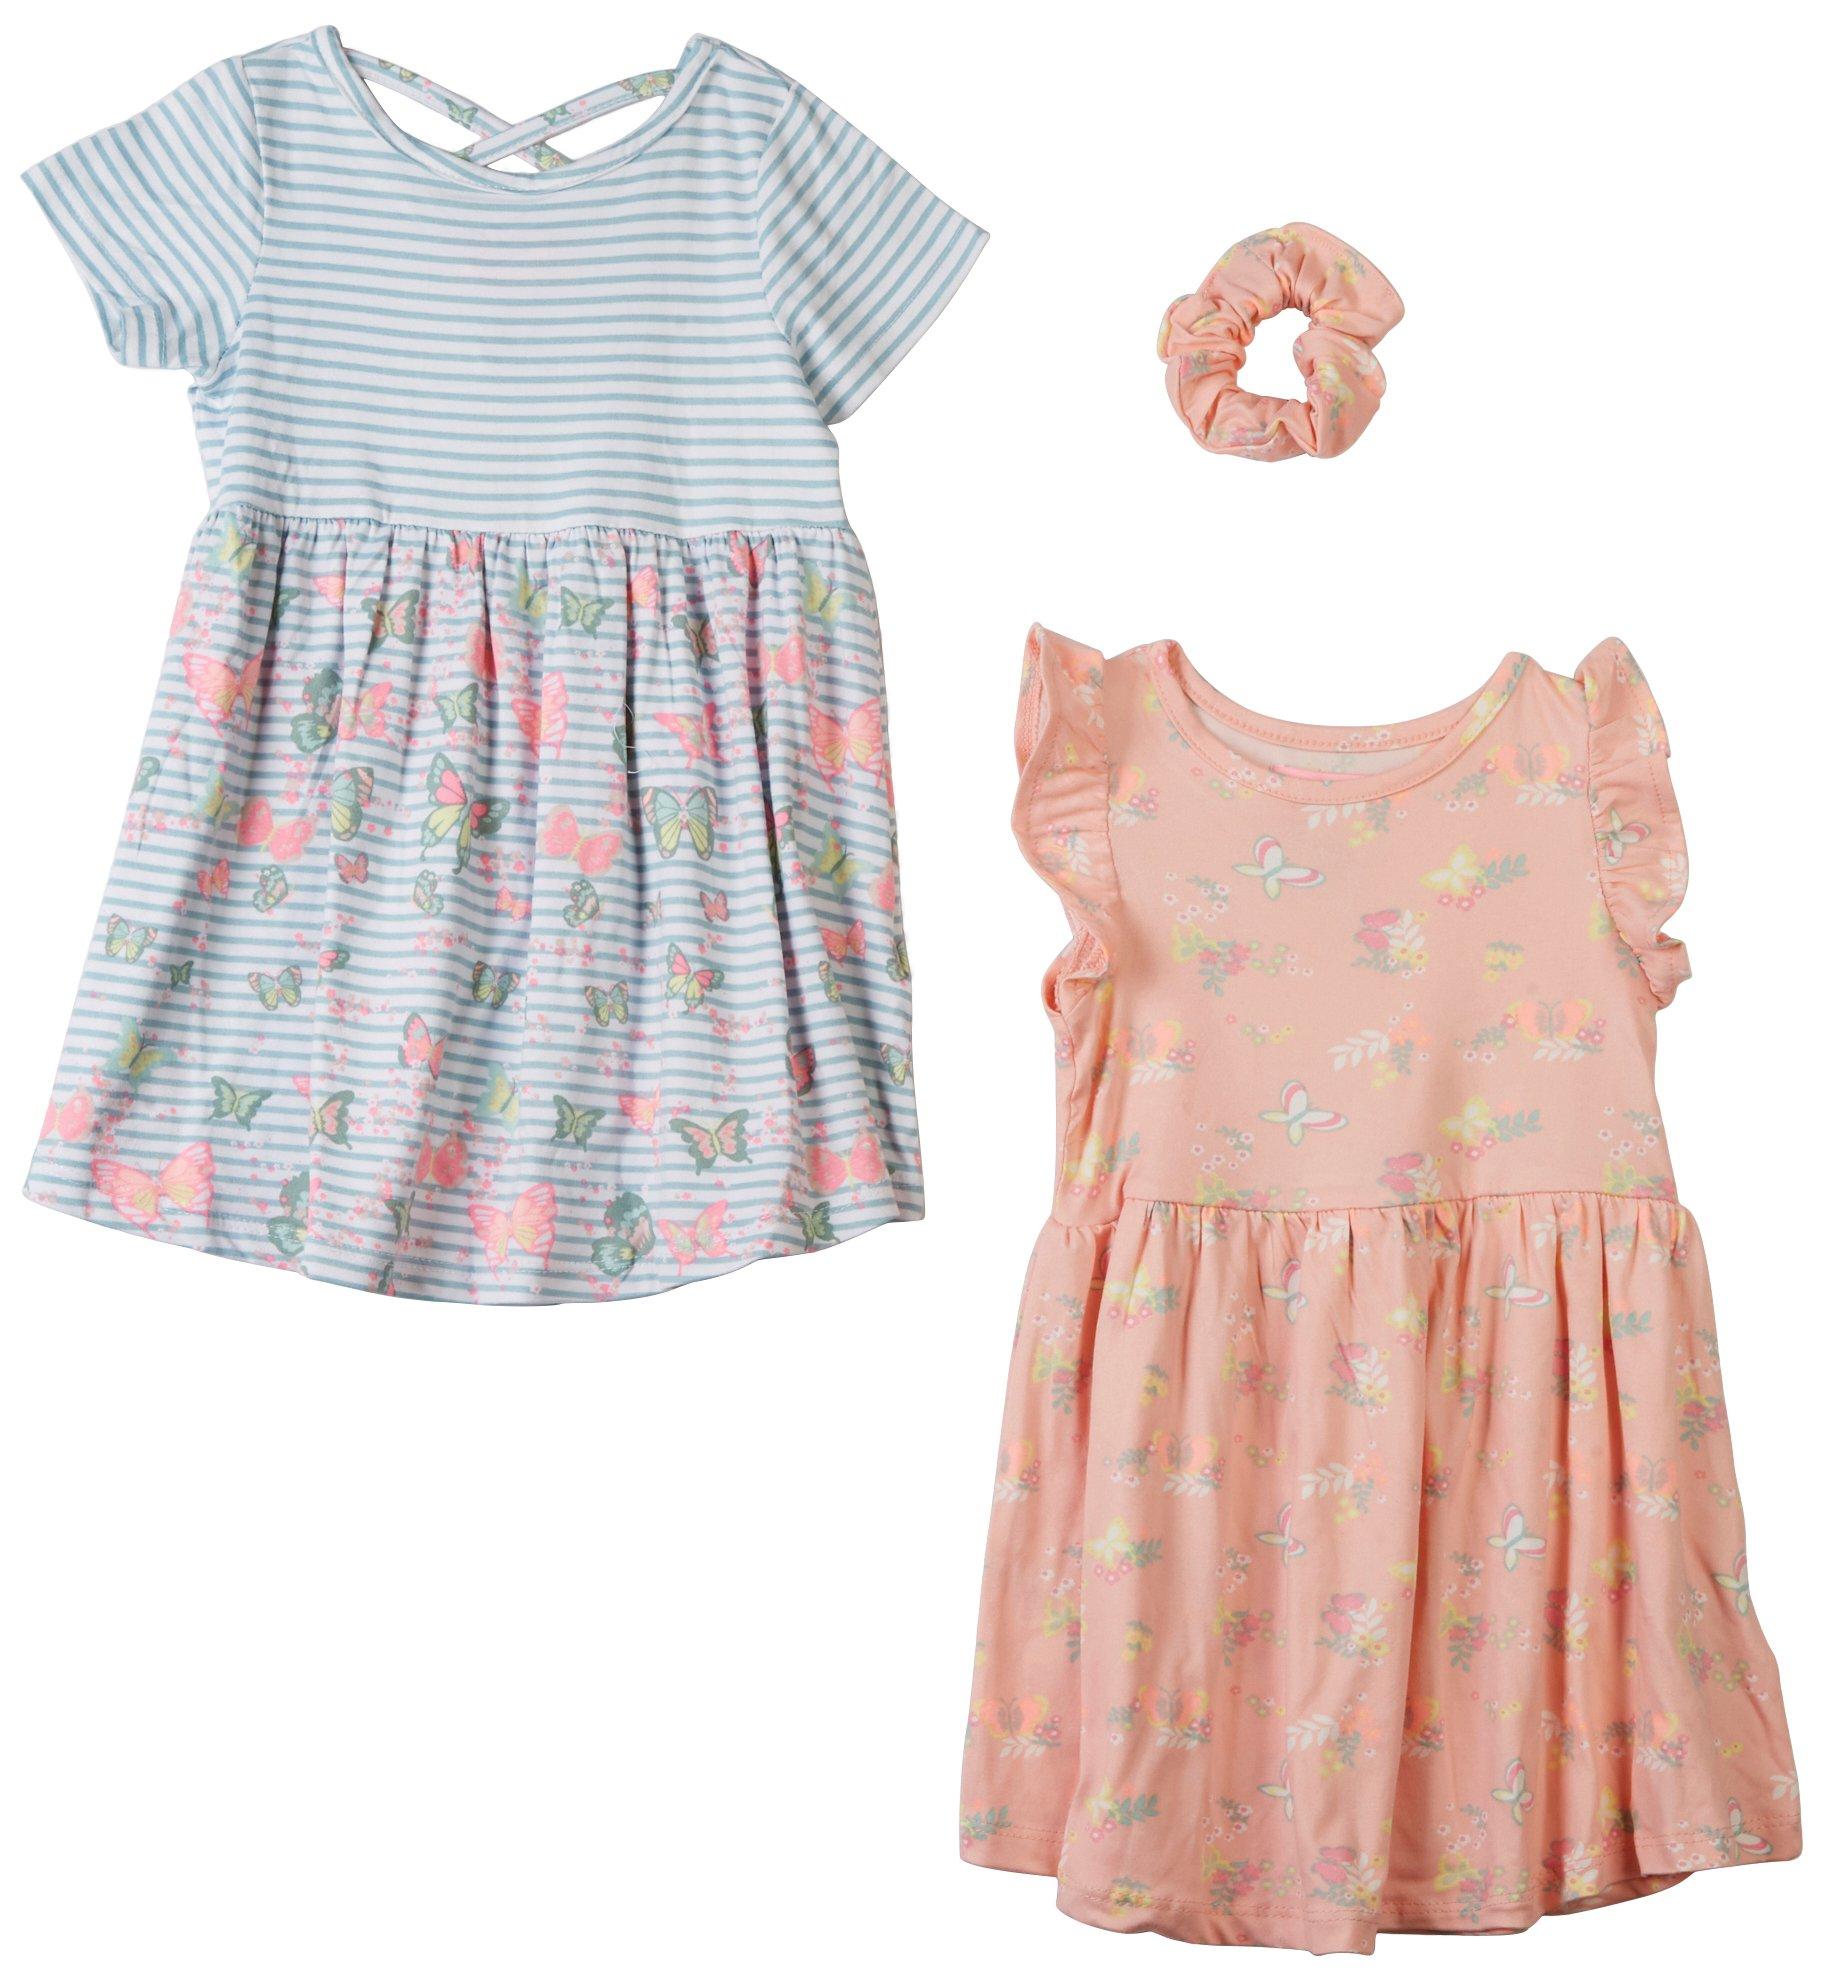 Freestyle Toddler Girls 3 Pc. Butterfly Dress Set